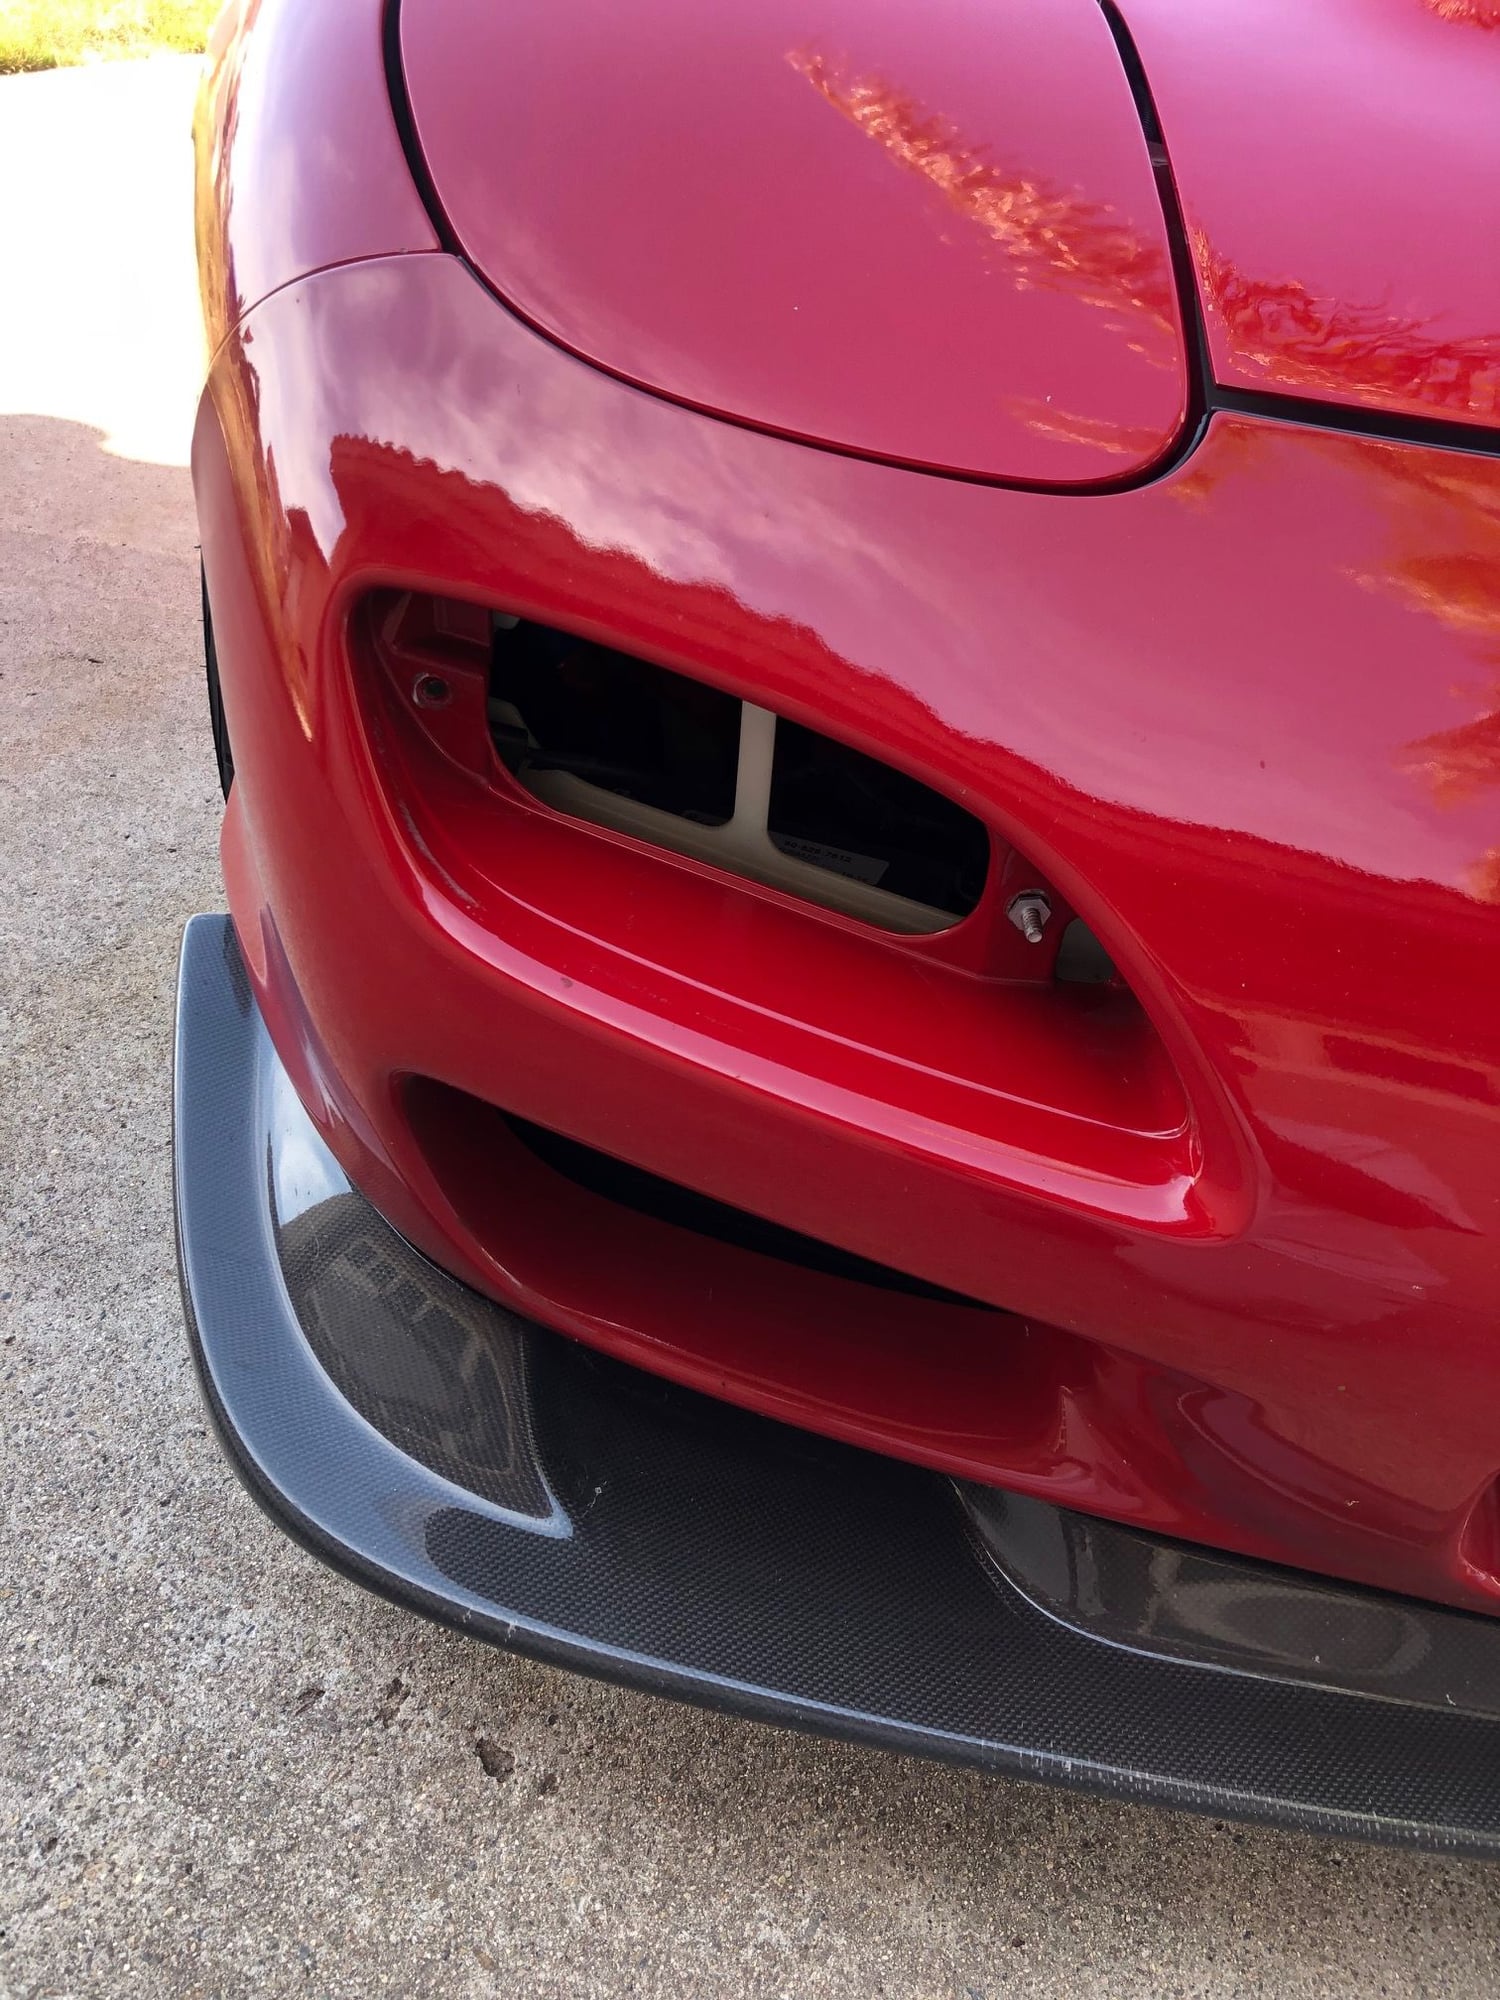 Lights - WTB: Passenger (USDM) or Driver (JDM) 99 spec bumper combo light - New or Used - 1992 to 2002 Mazda RX-7 - San Diego, CA 92114, United States